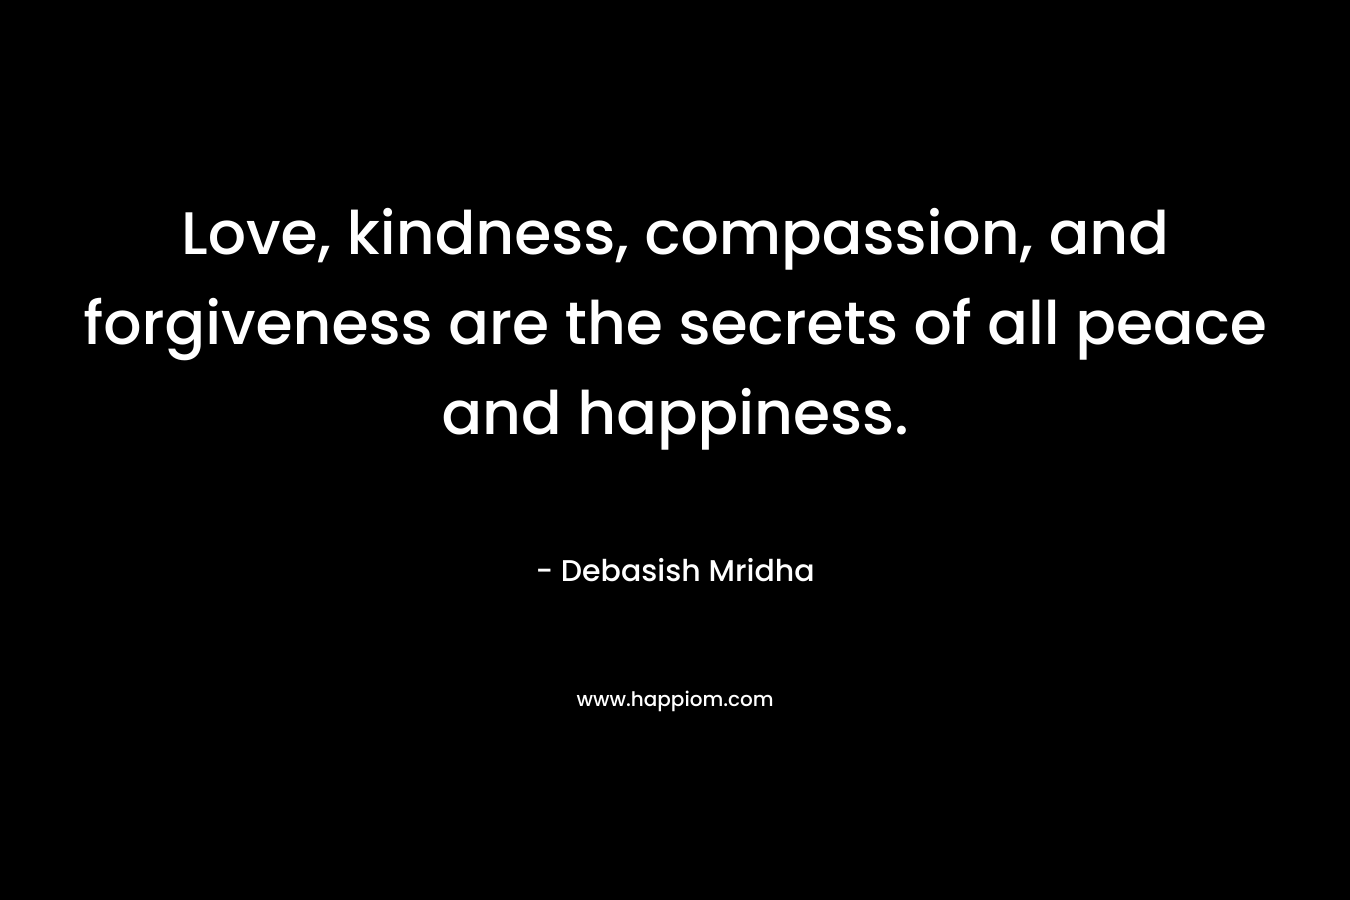 Love, kindness, compassion, and forgiveness are the secrets of all peace and happiness.